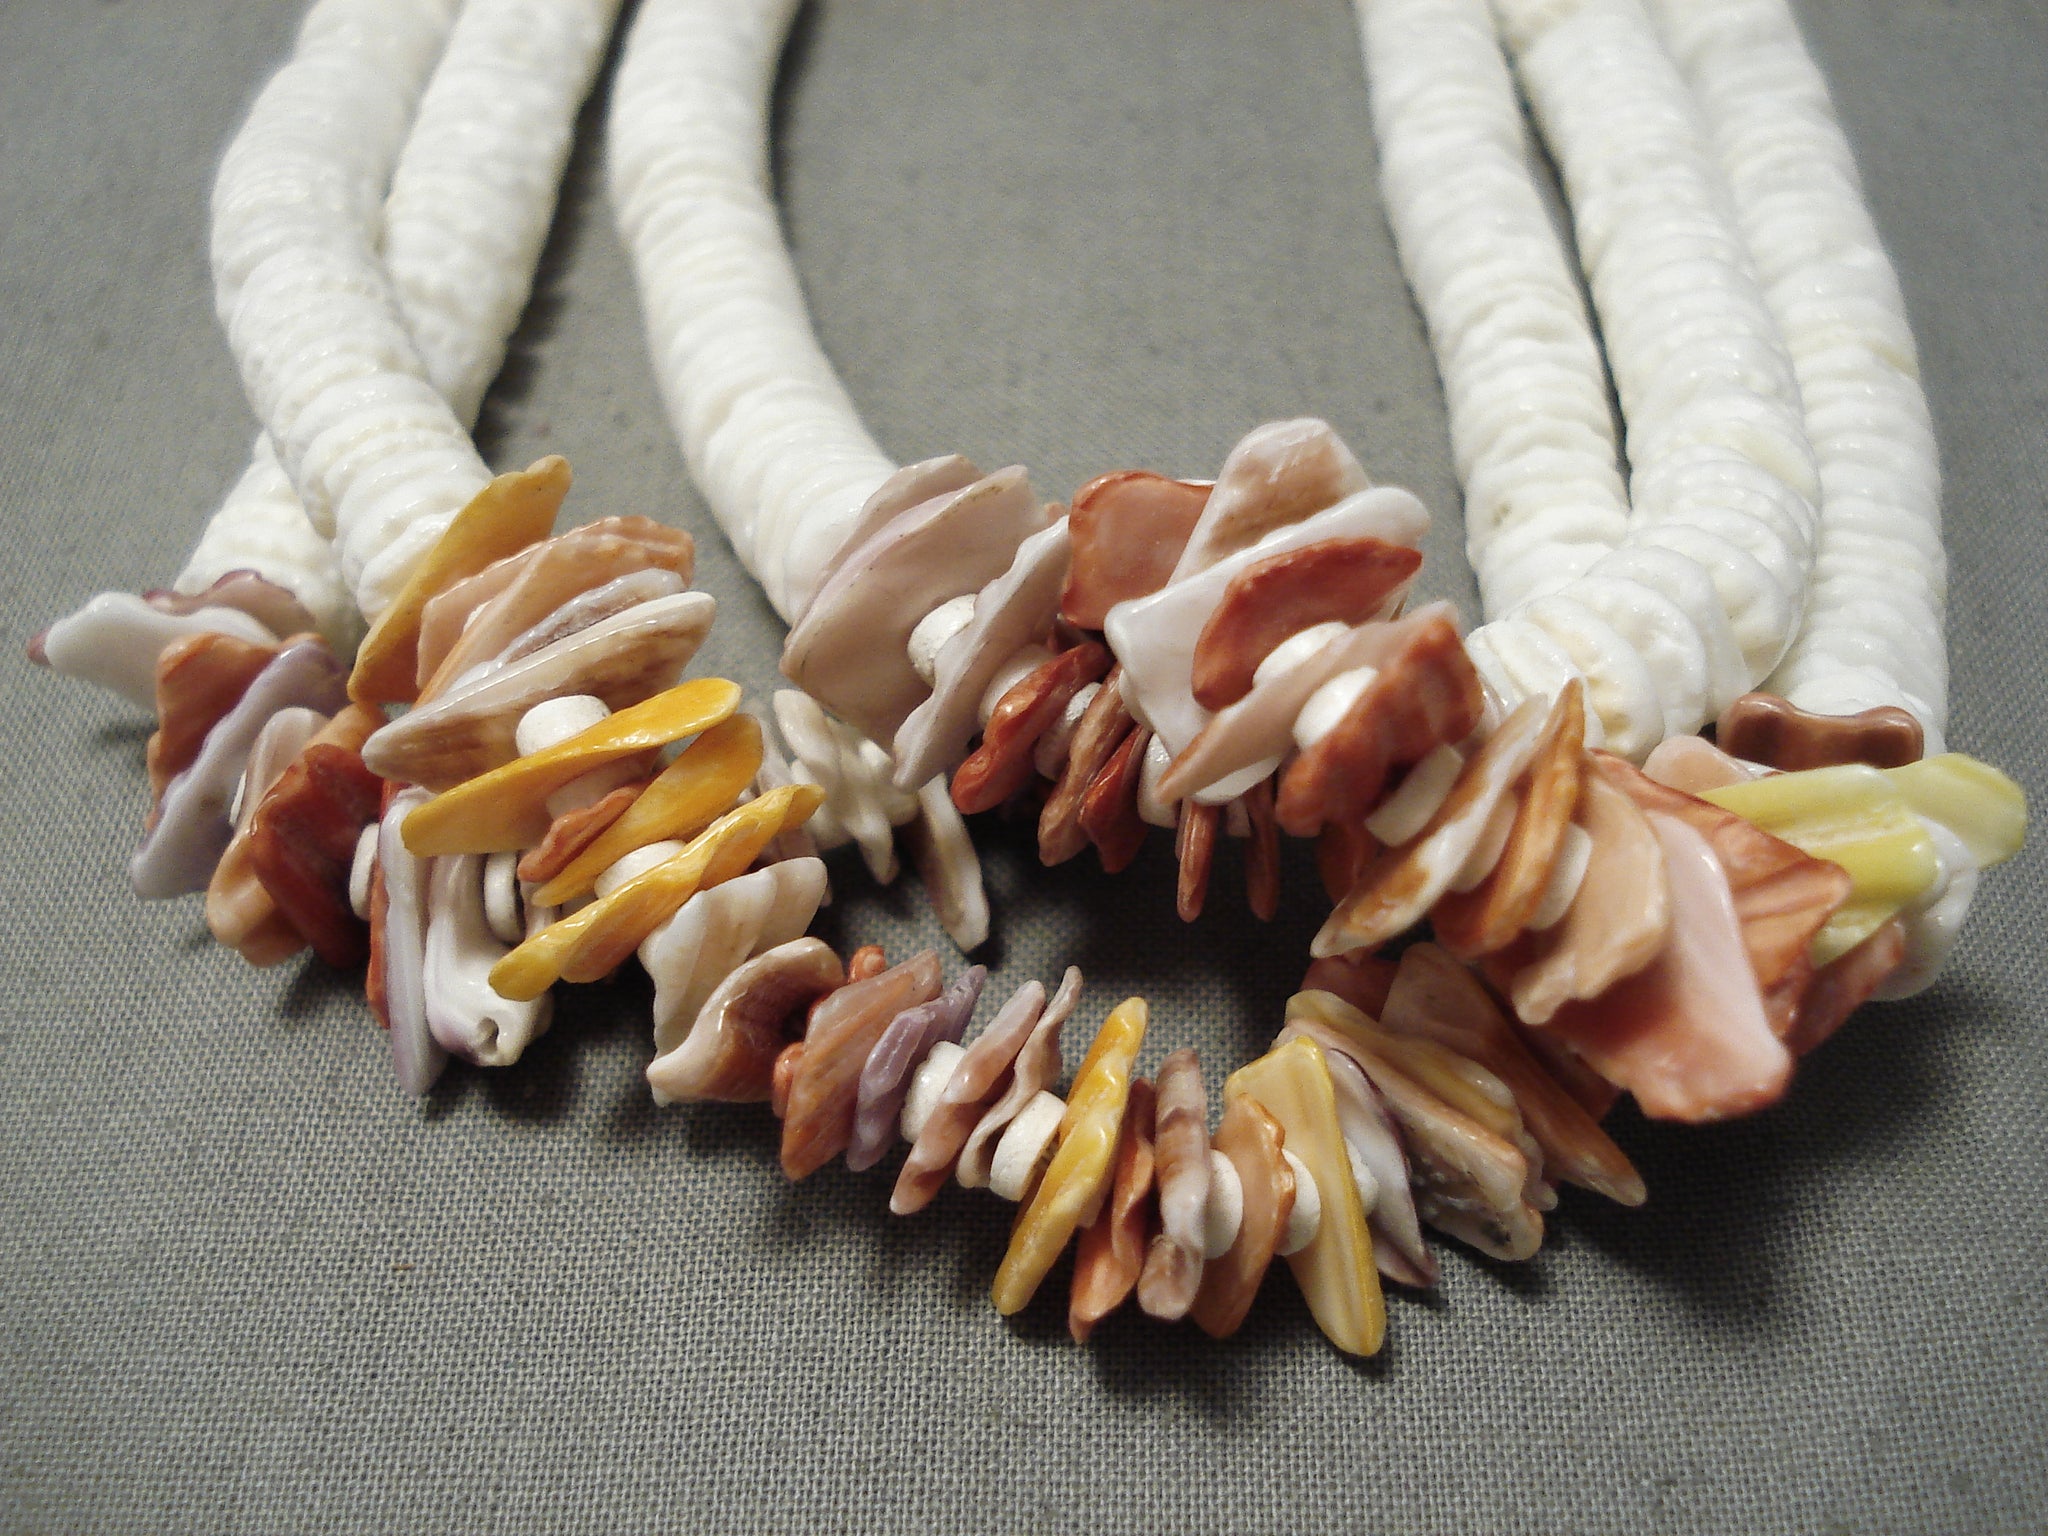 Vintage Puka Shell /14-19 Necklaces / Naturally Formed by the Sea / Vintage  1960-70s/ Beads / Hawaii / Creamy Color / Each Sold Separately - Etsy